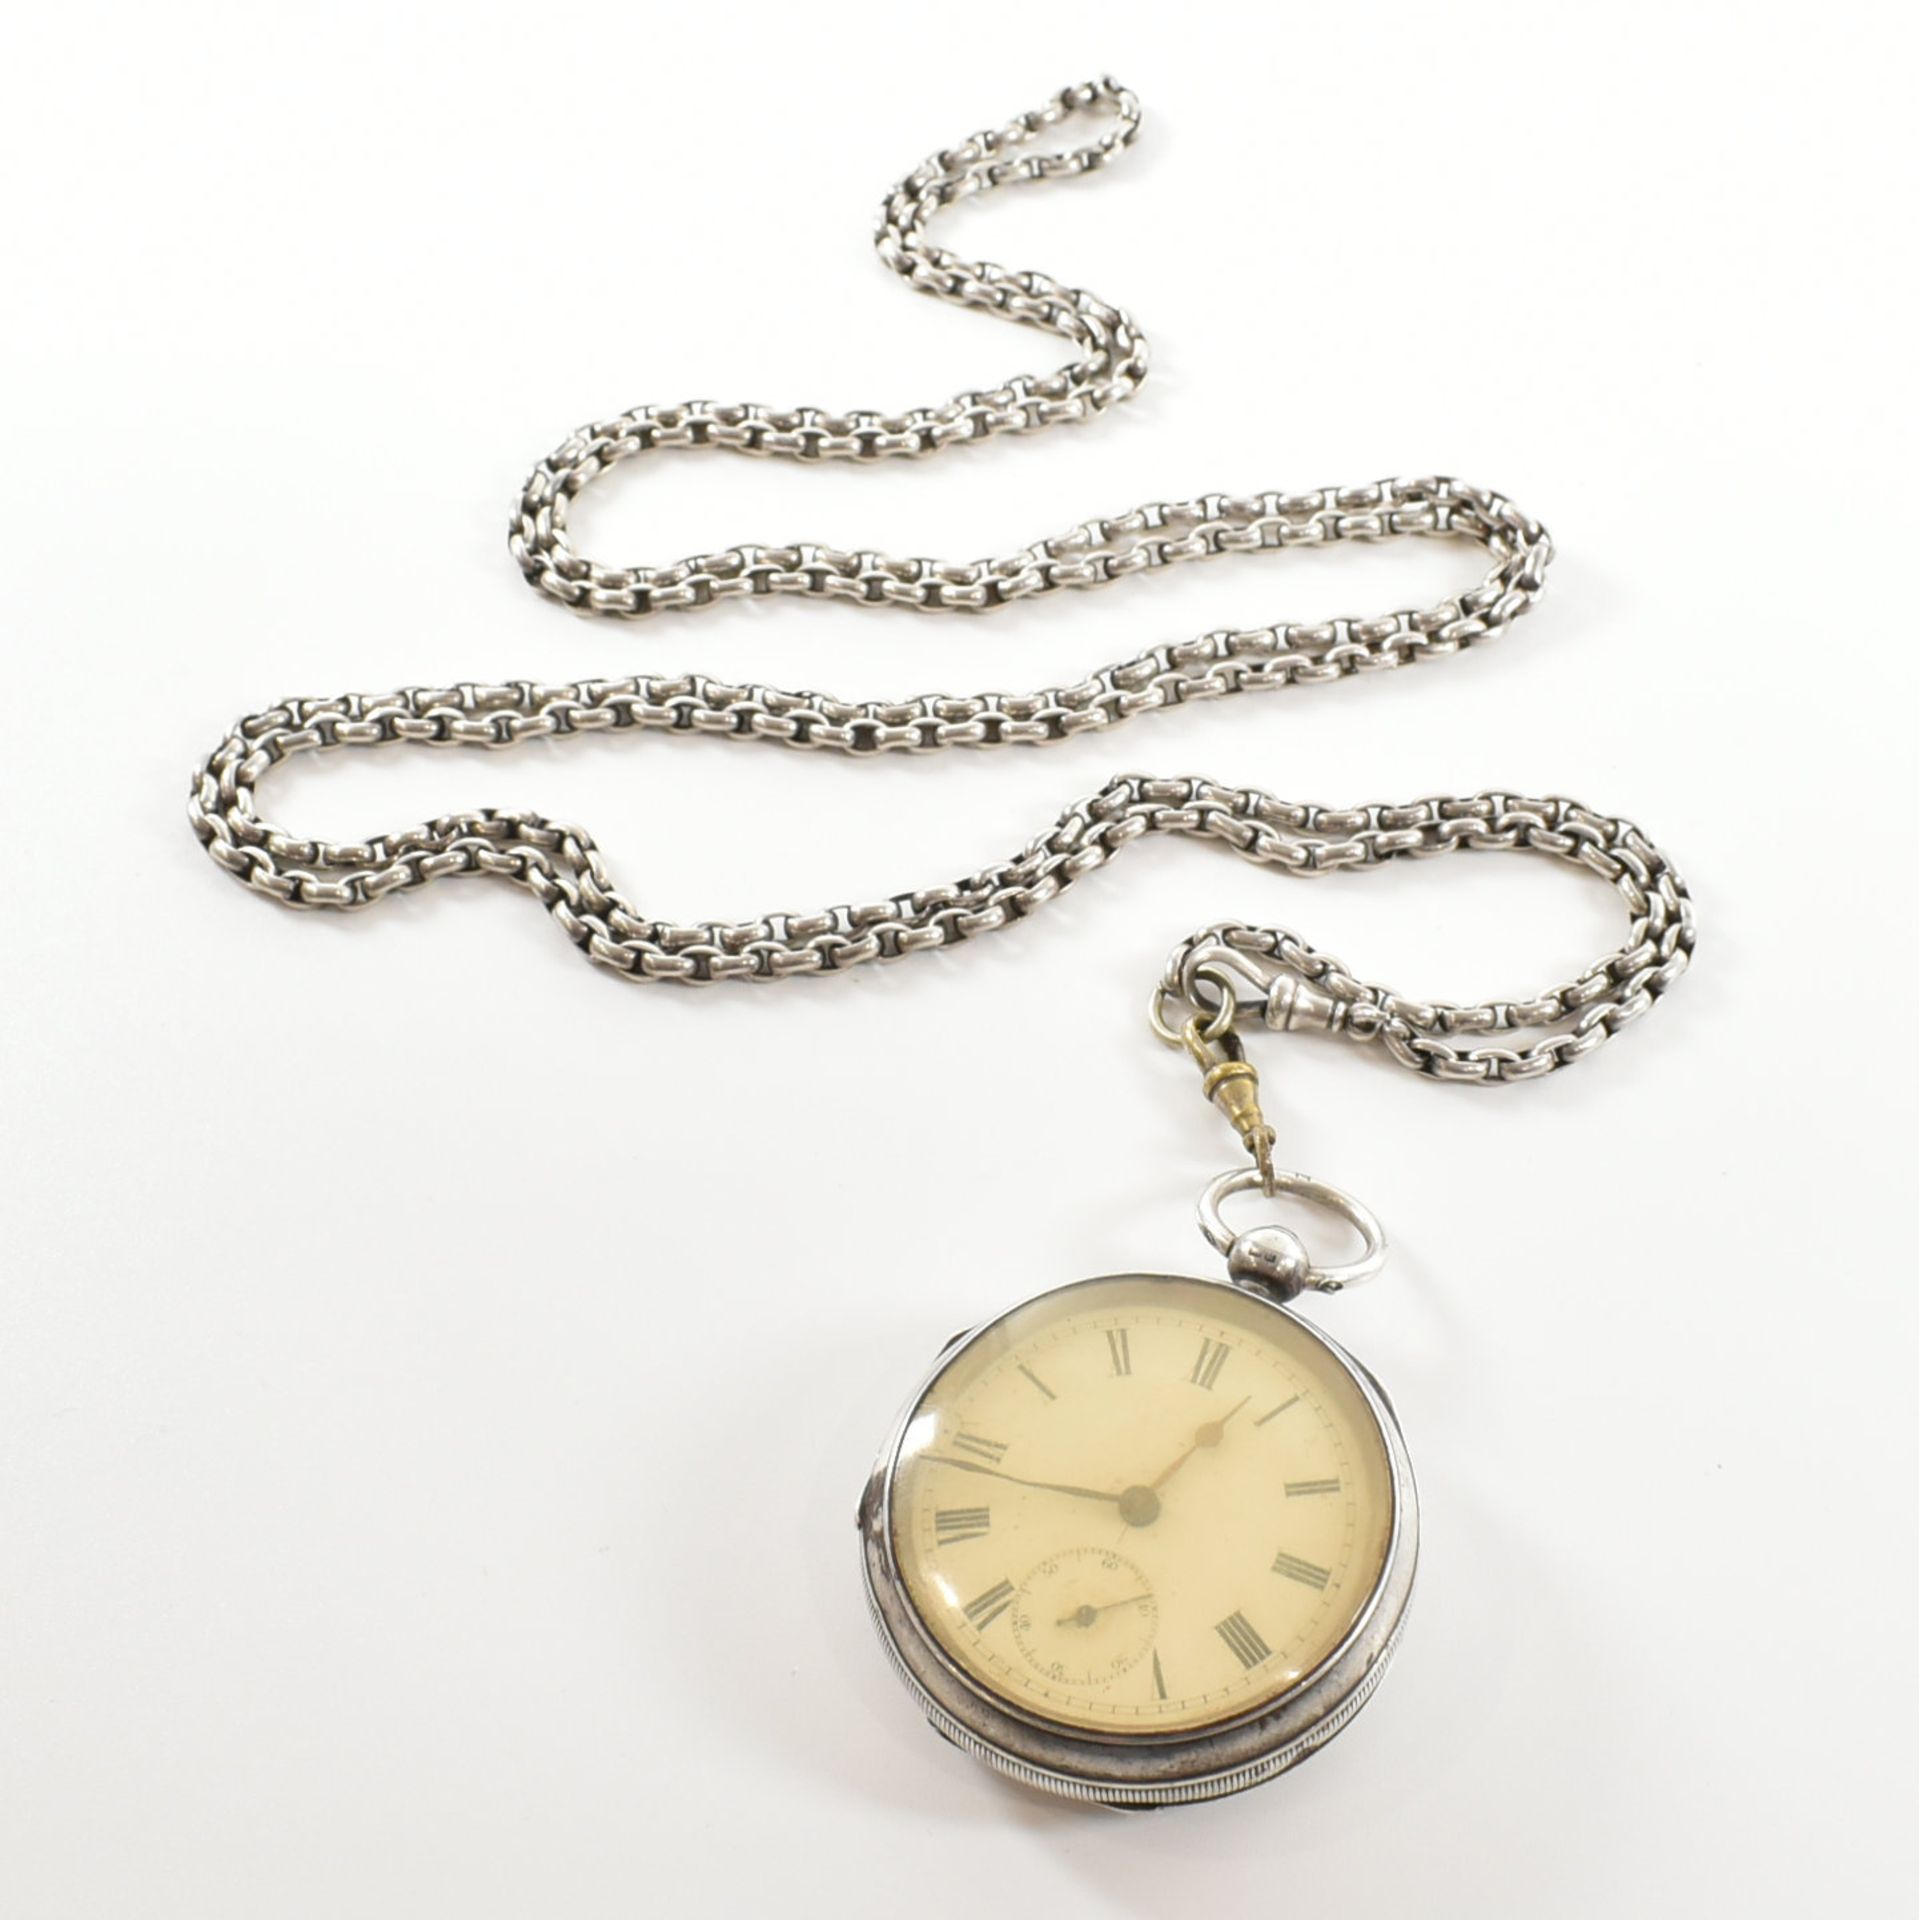 EARLY 20TH CENTURY 1901 HALLMARKED SILVER CASE POCKET WATCH - Image 12 of 14